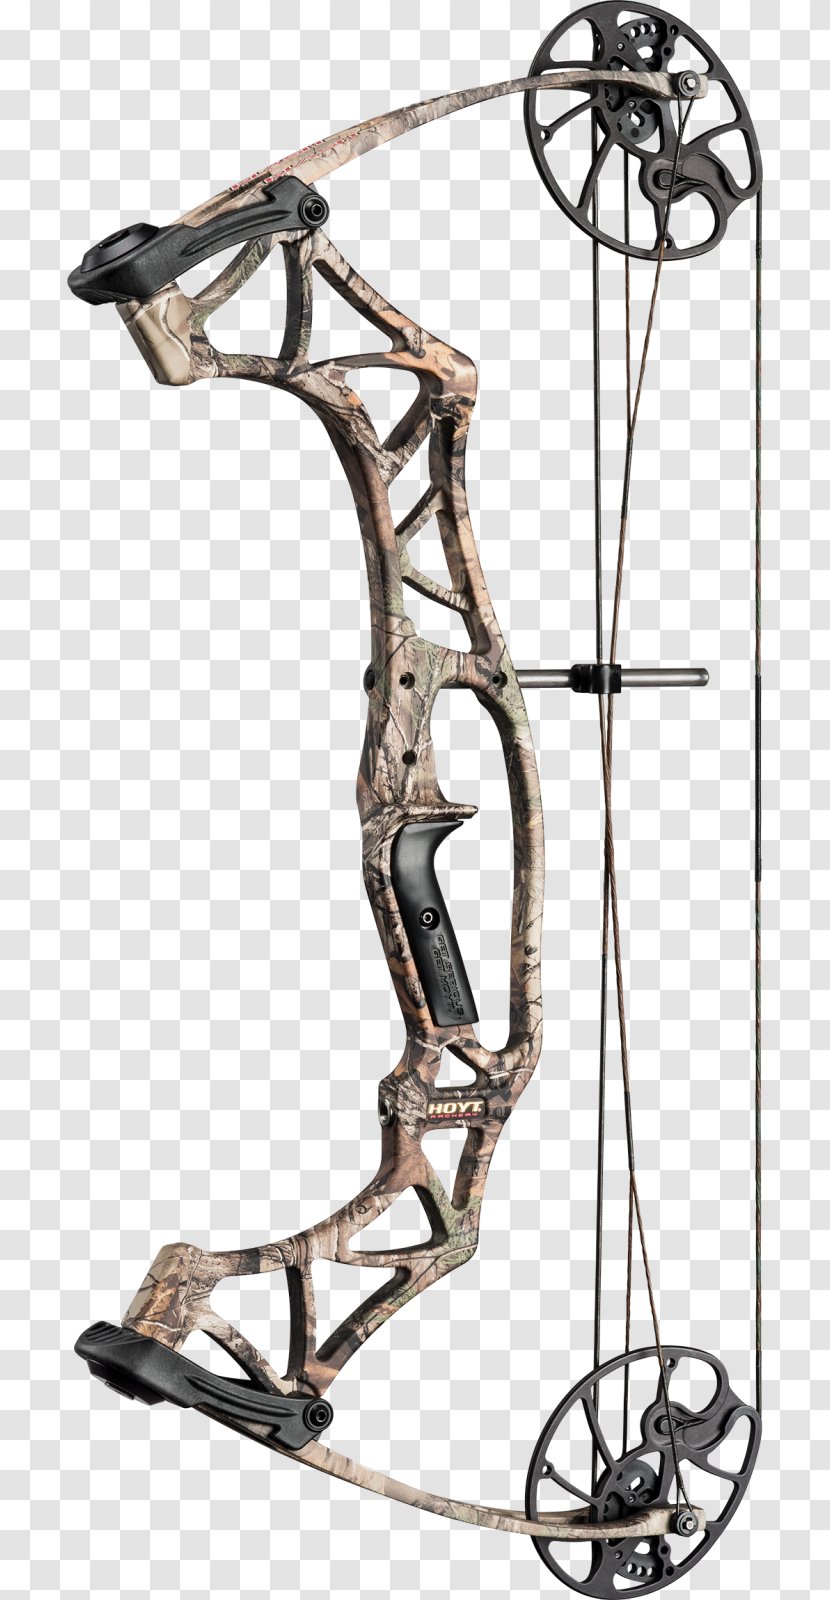 Bow And Arrow Compound Bows Archery Bowhunting - Mounted Transparent PNG